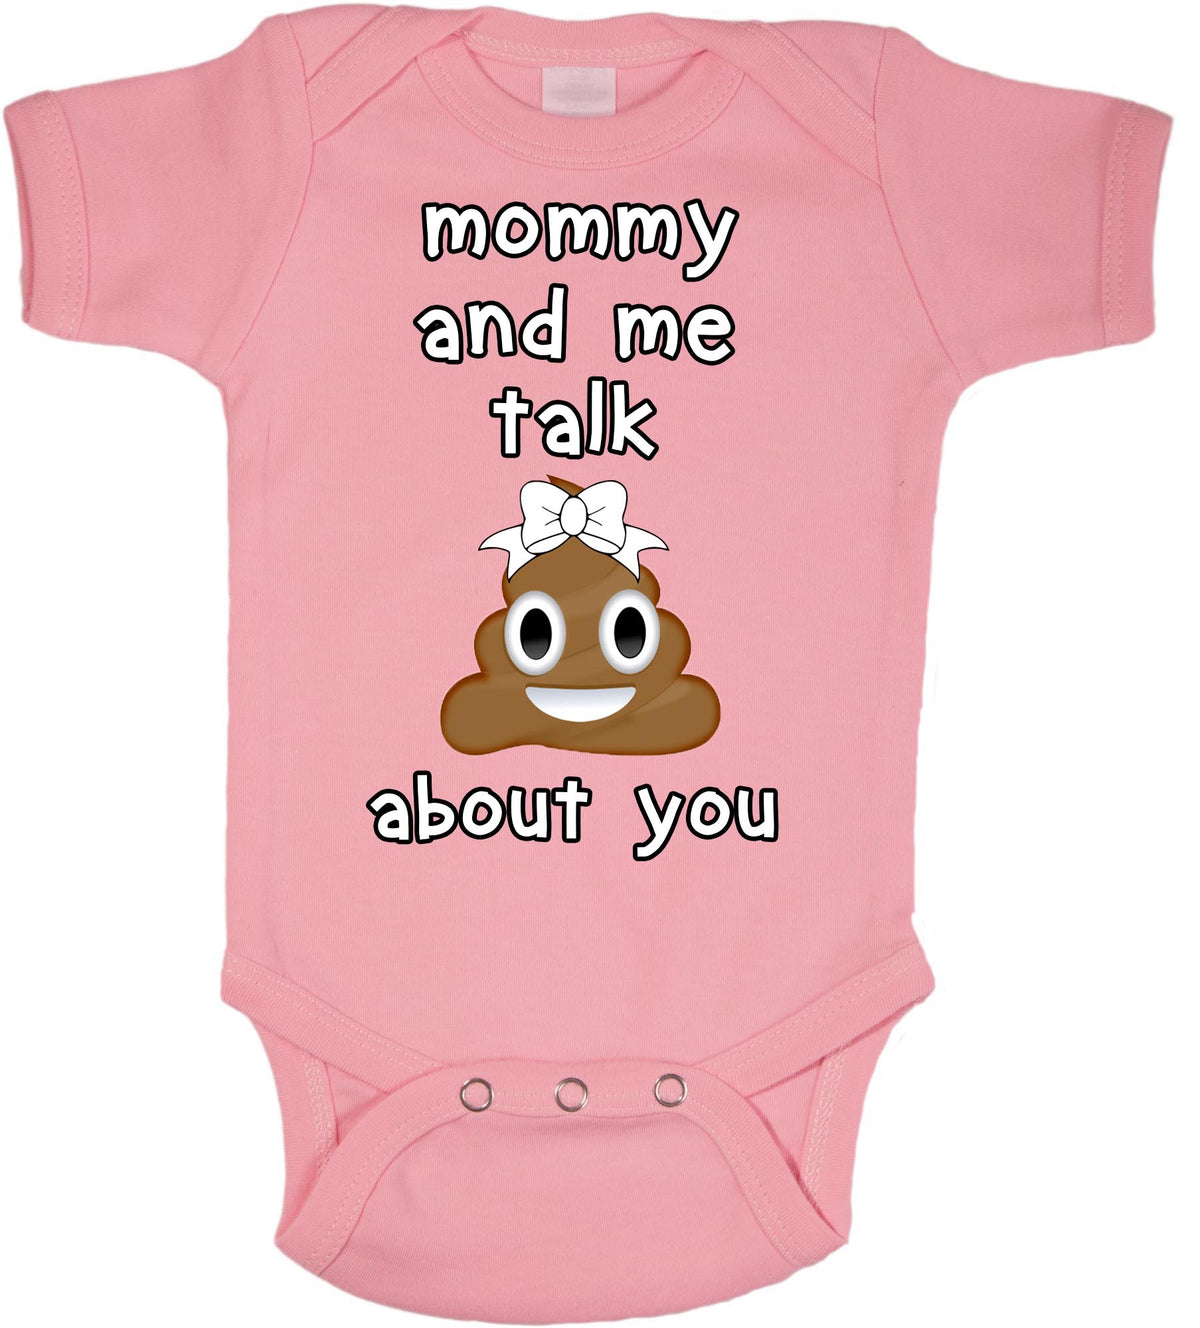 Mommy and me talk about you bodysuit